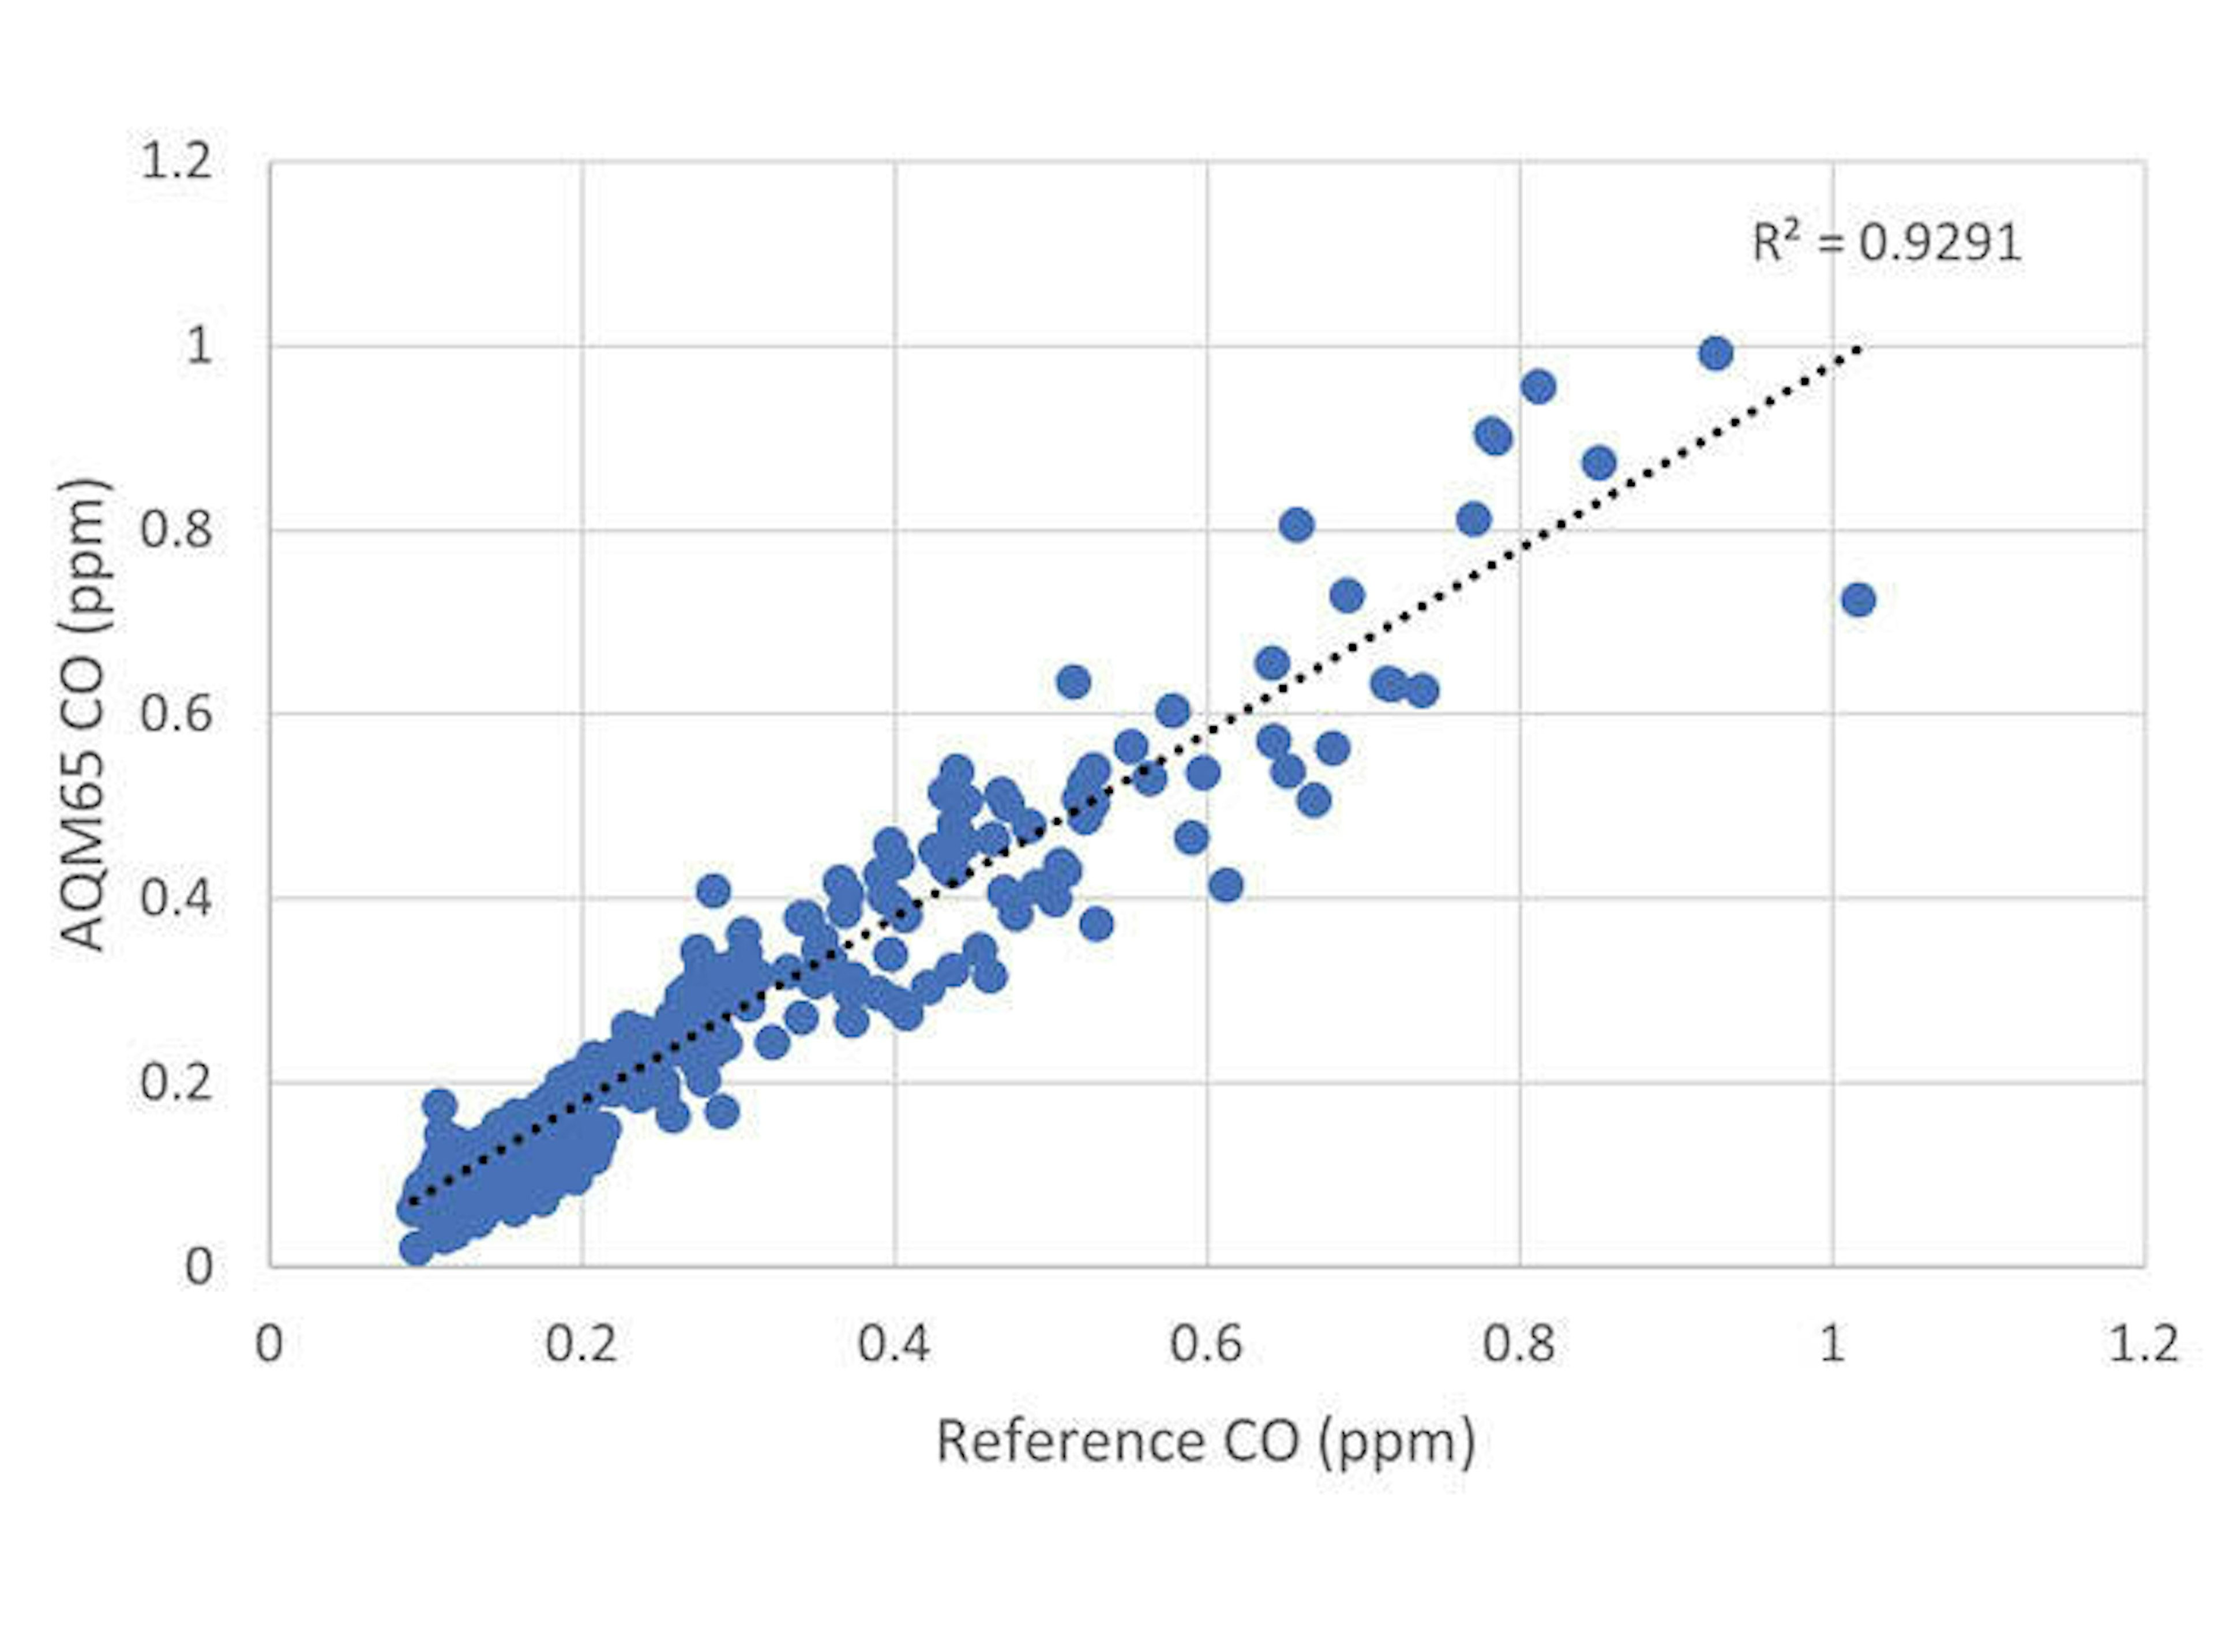 Carbon monoxide module scatter plot of data with linear regression and coefficient of determination